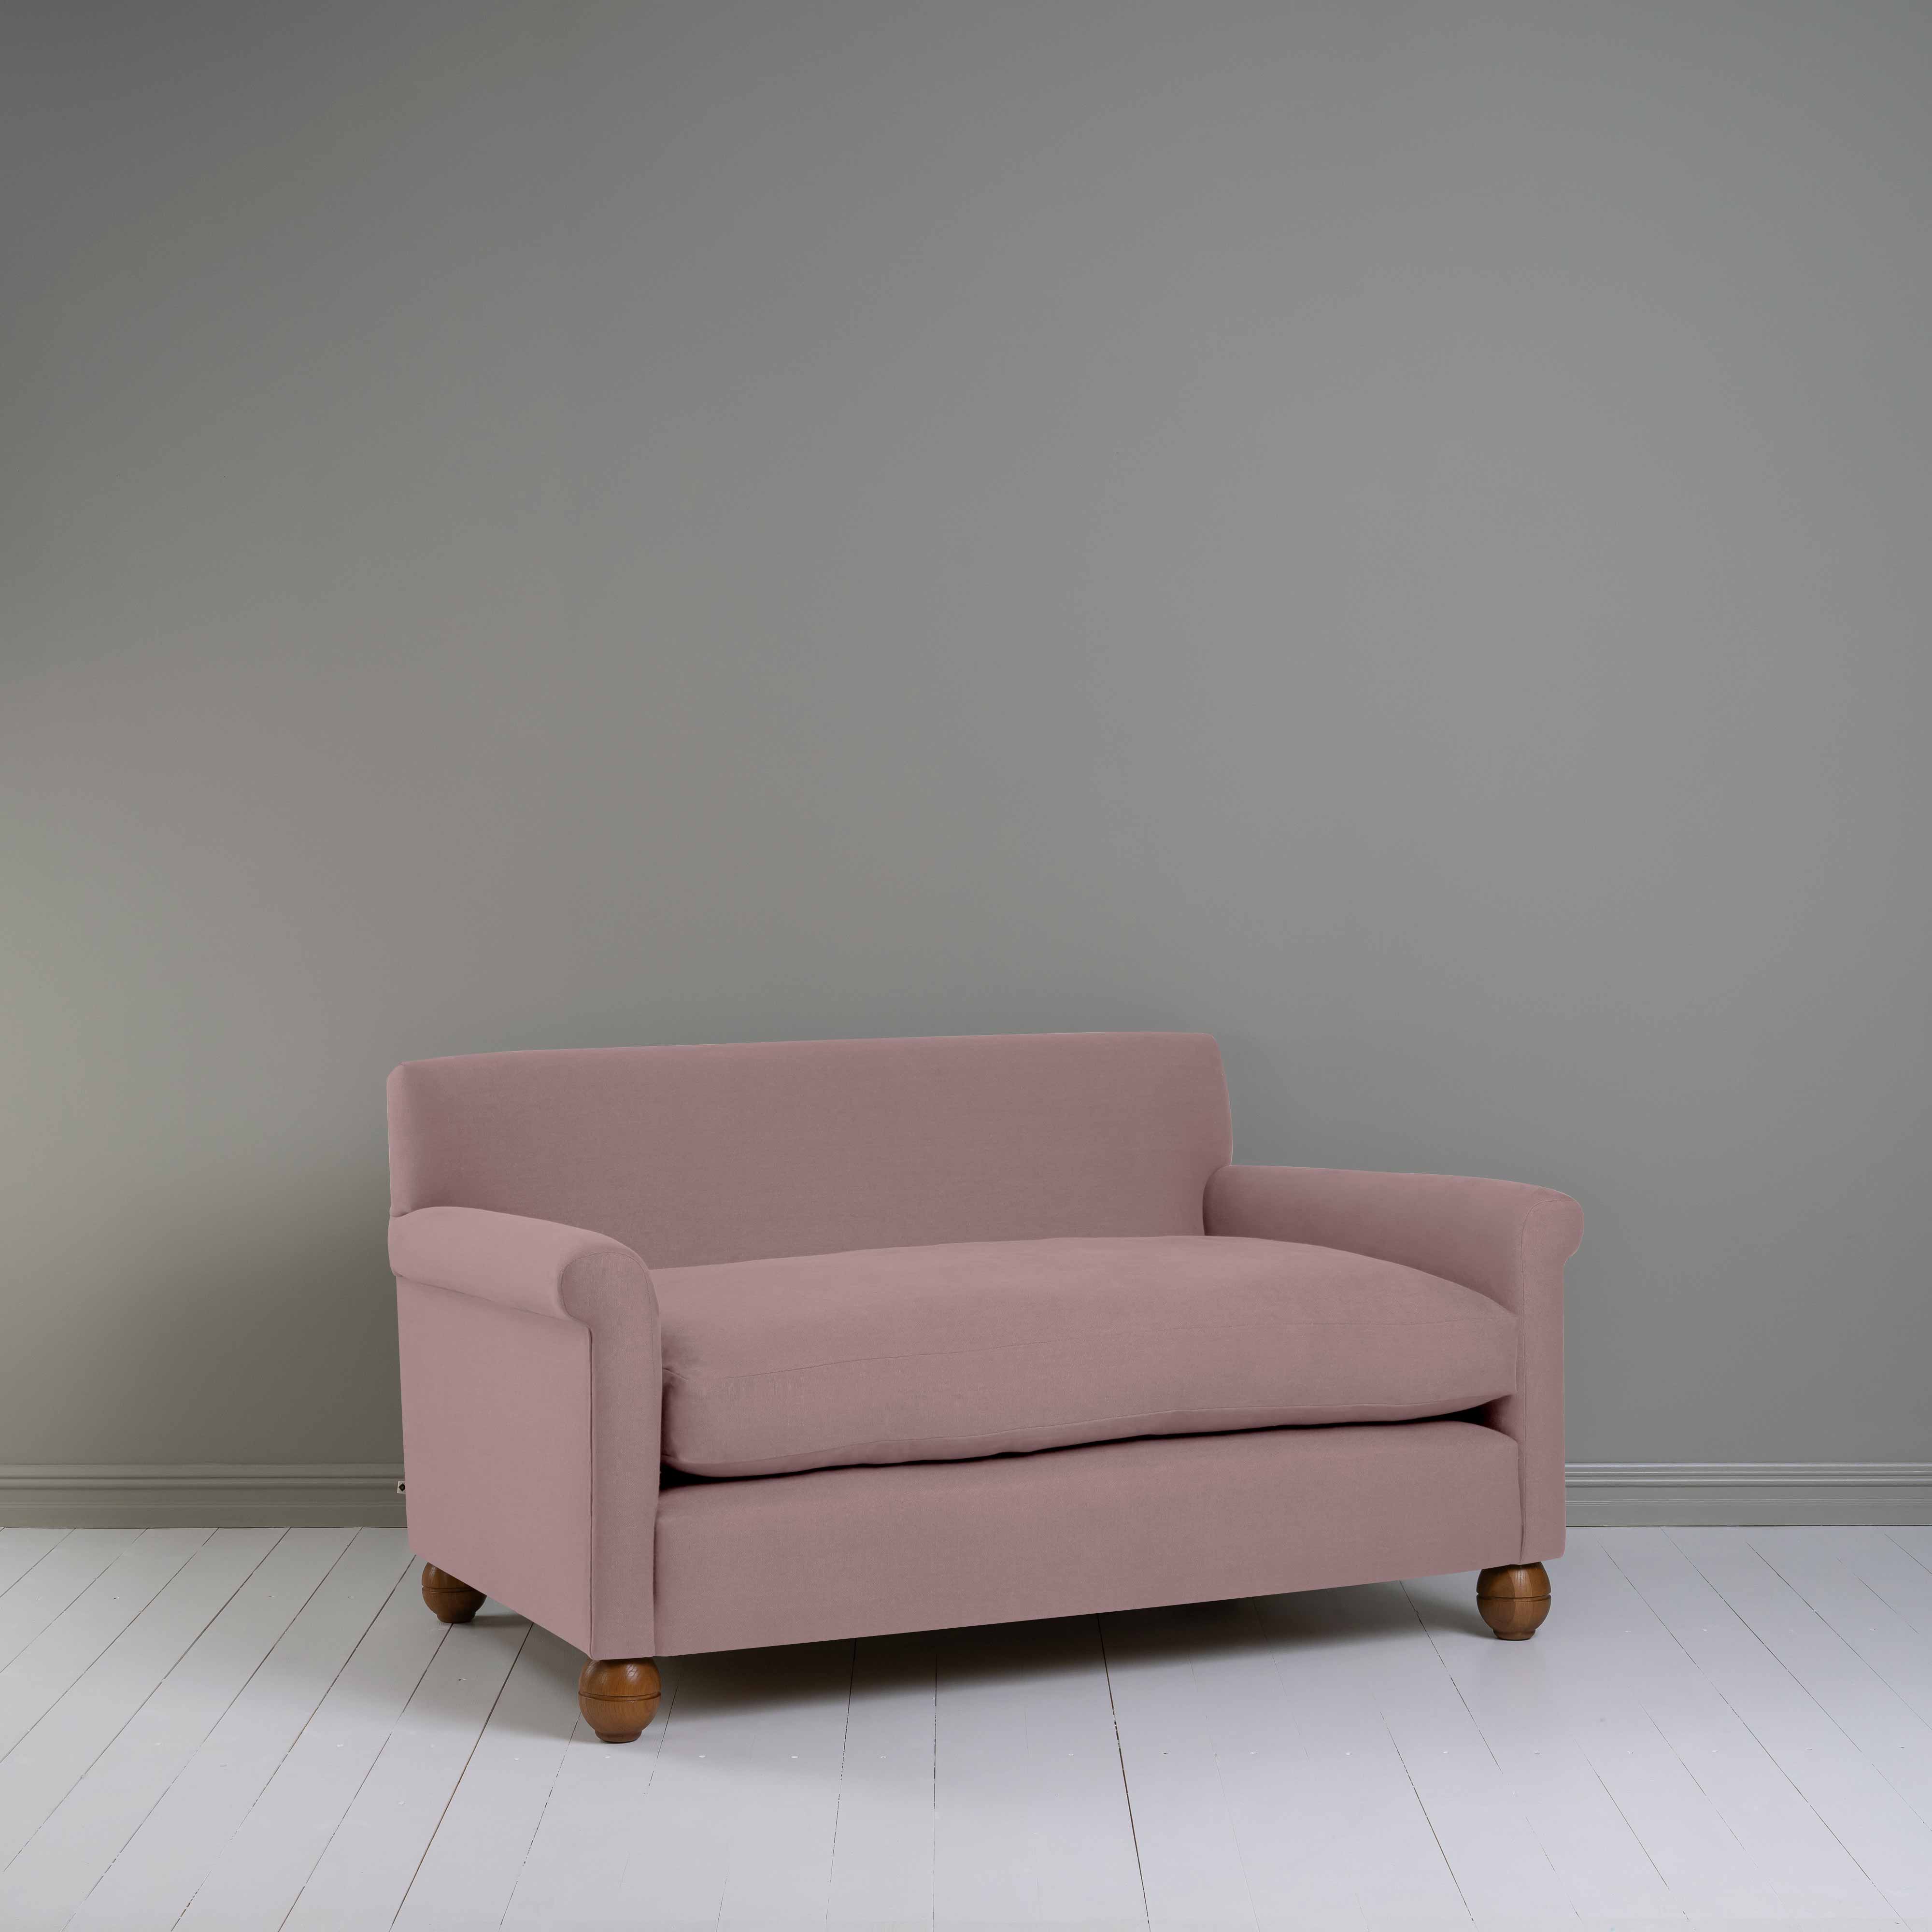  Idler 2 Seater Sofa in Laidback Linen Heather 